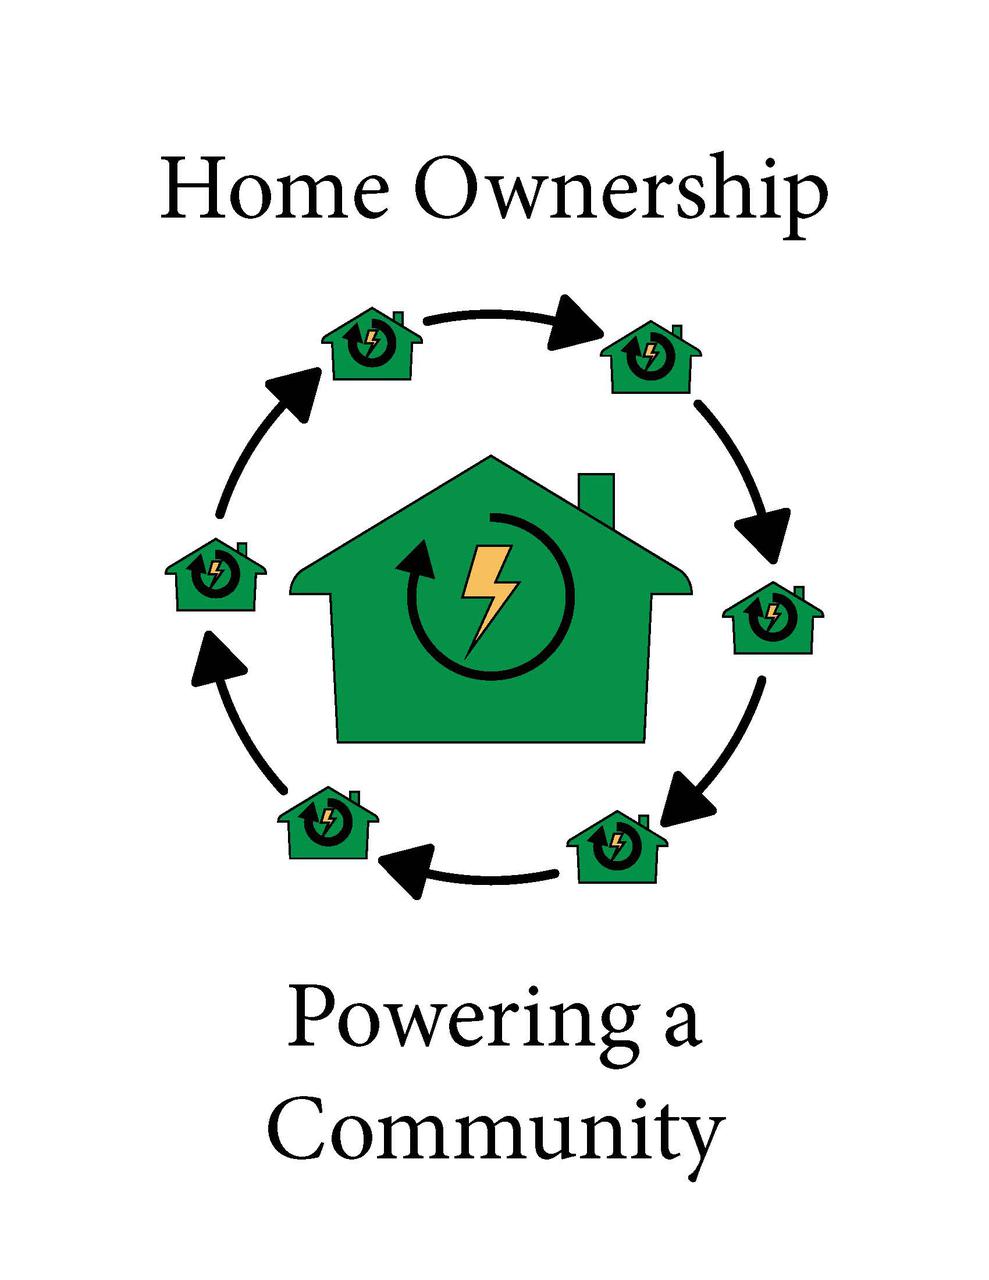 house illustration in center with small, identical house illustrations in a ring around center house. The text says "Homeownership" and "Powering a Community".